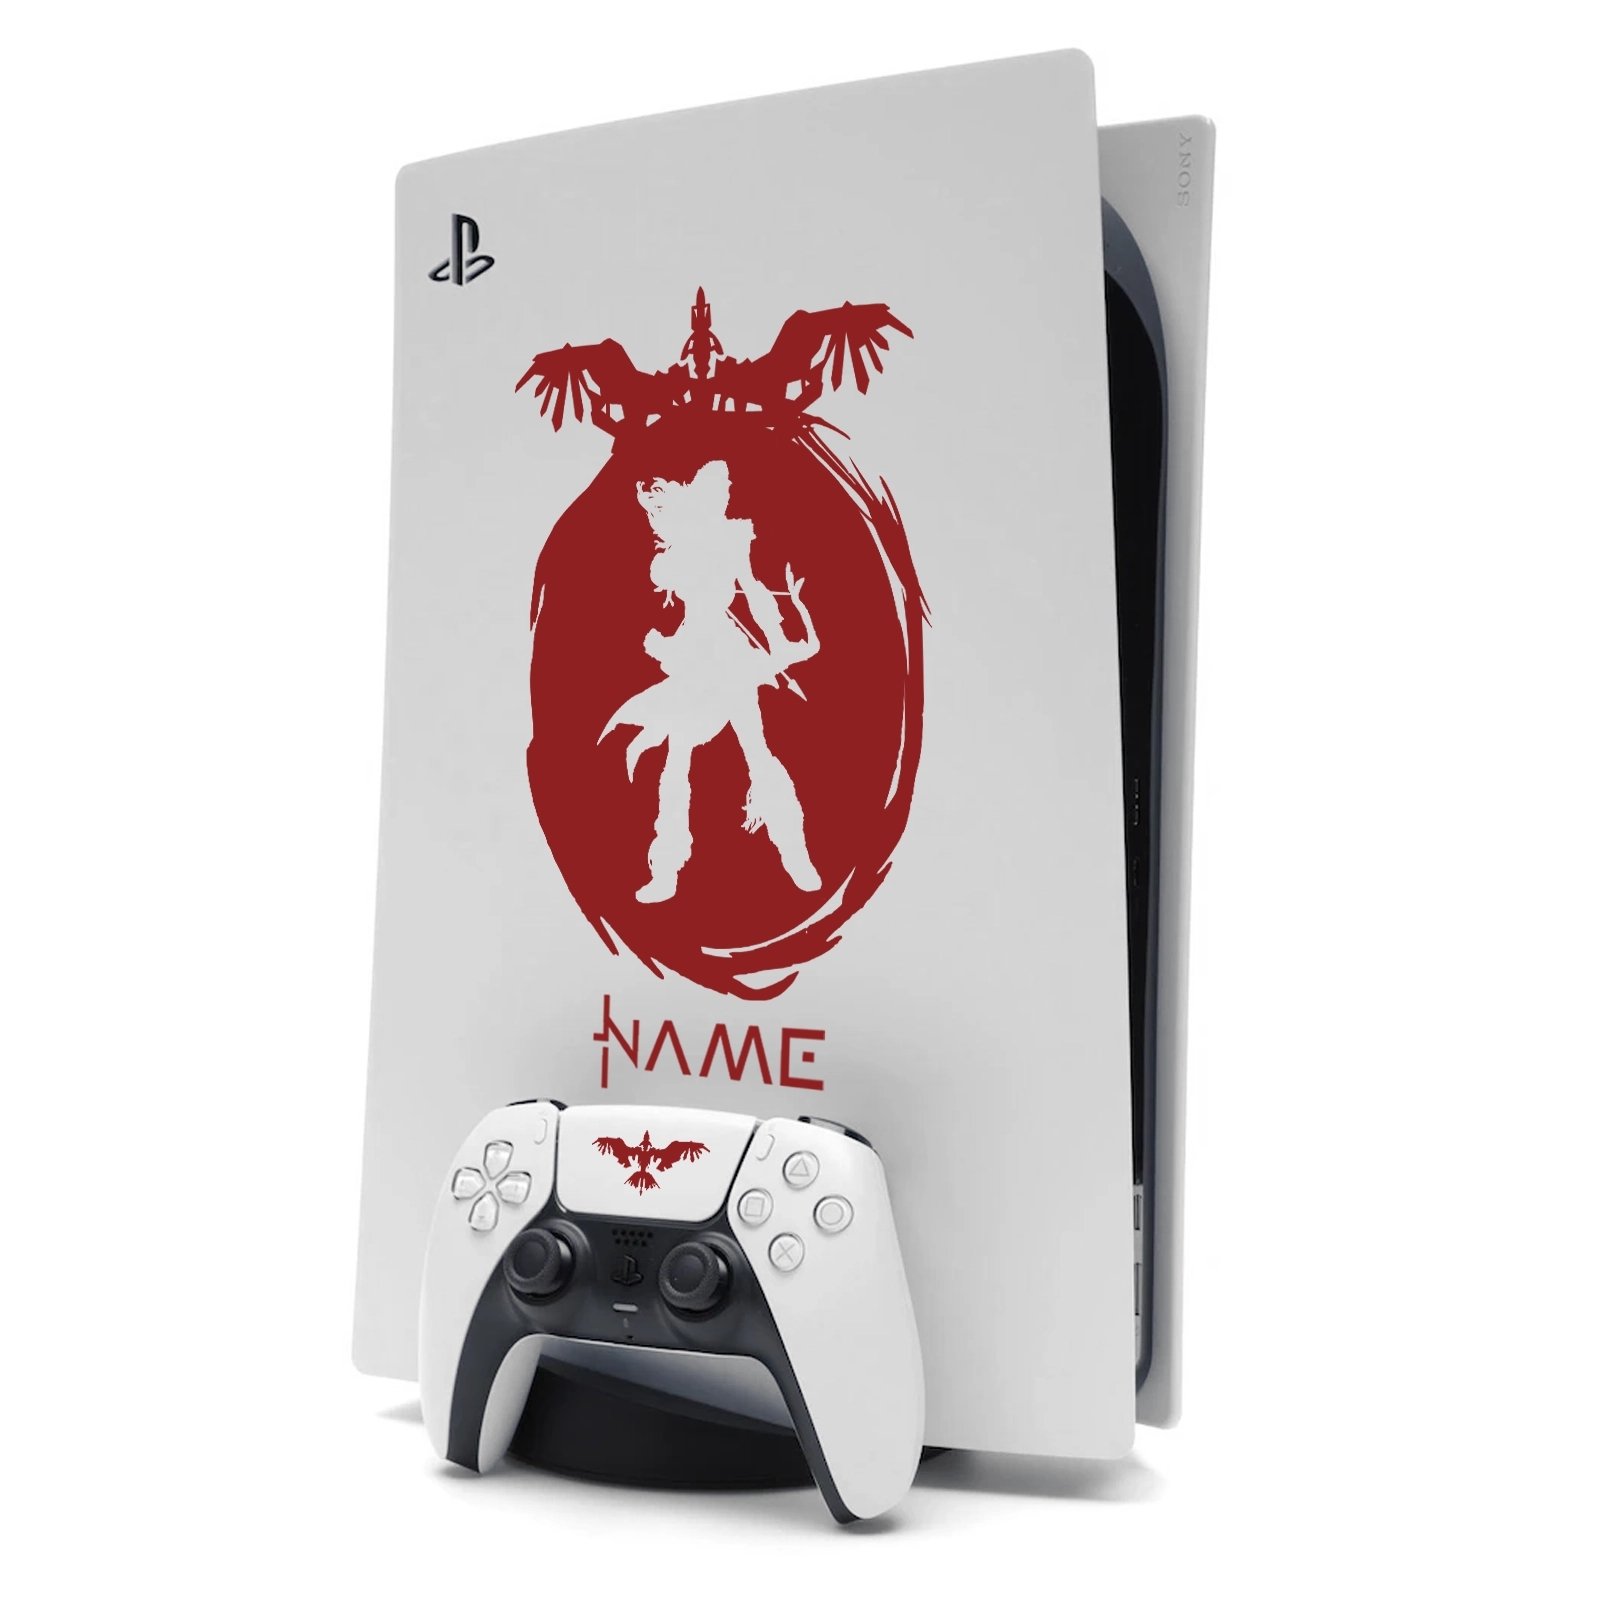 Horizon Aloy PS5 Sticker Skin for Playstation 5 in Burgundy